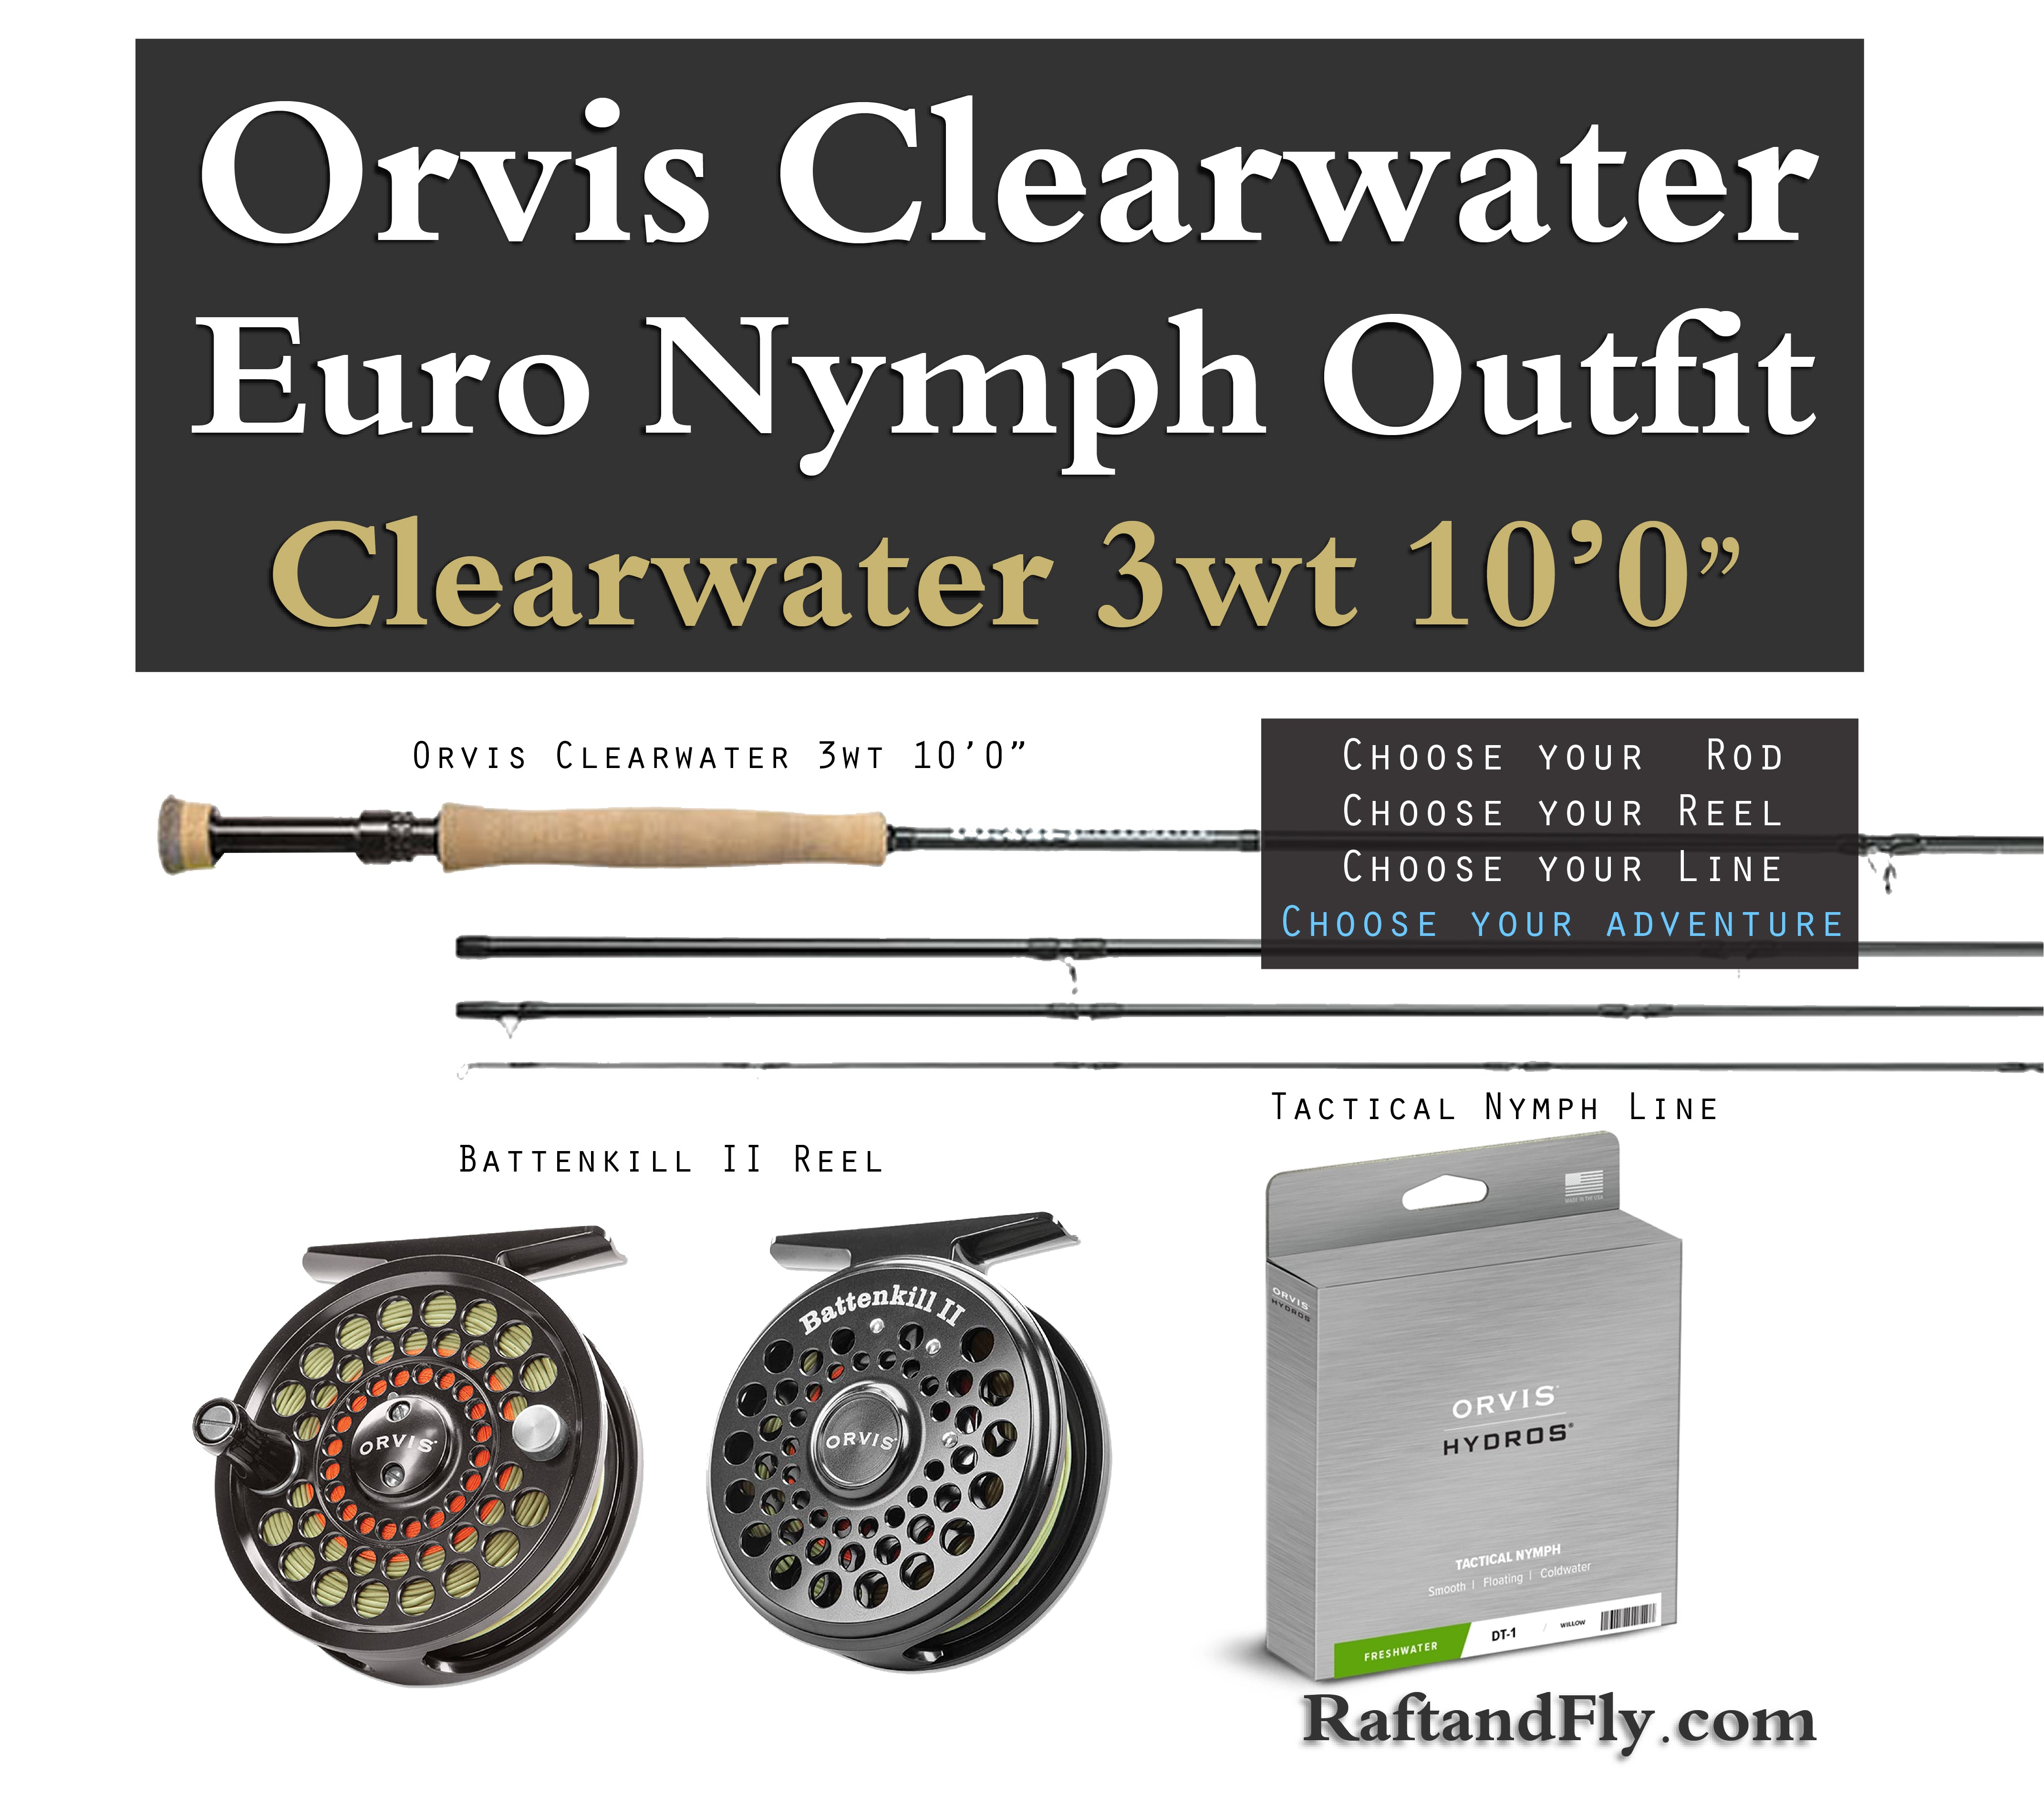 Orvis Clearwater 3wt 10'0 Nymph Outfit Package, Hydros Nymph Line,  Battenkill